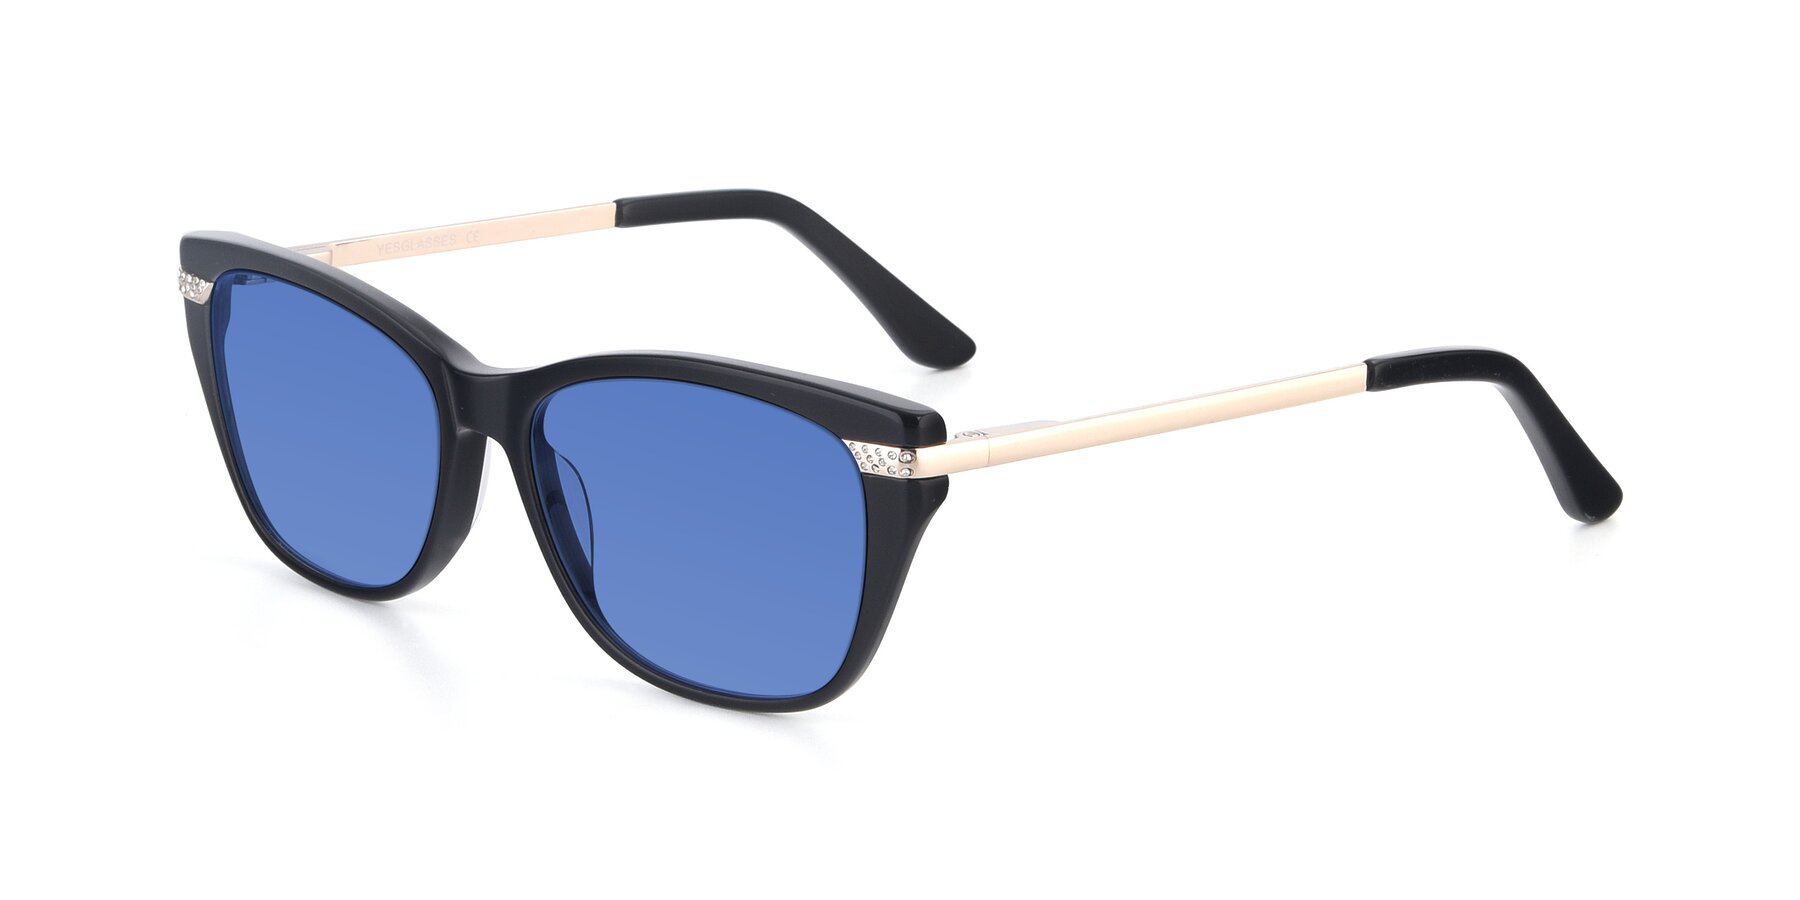 Angle of 17515 in Black with Blue Tinted Lenses